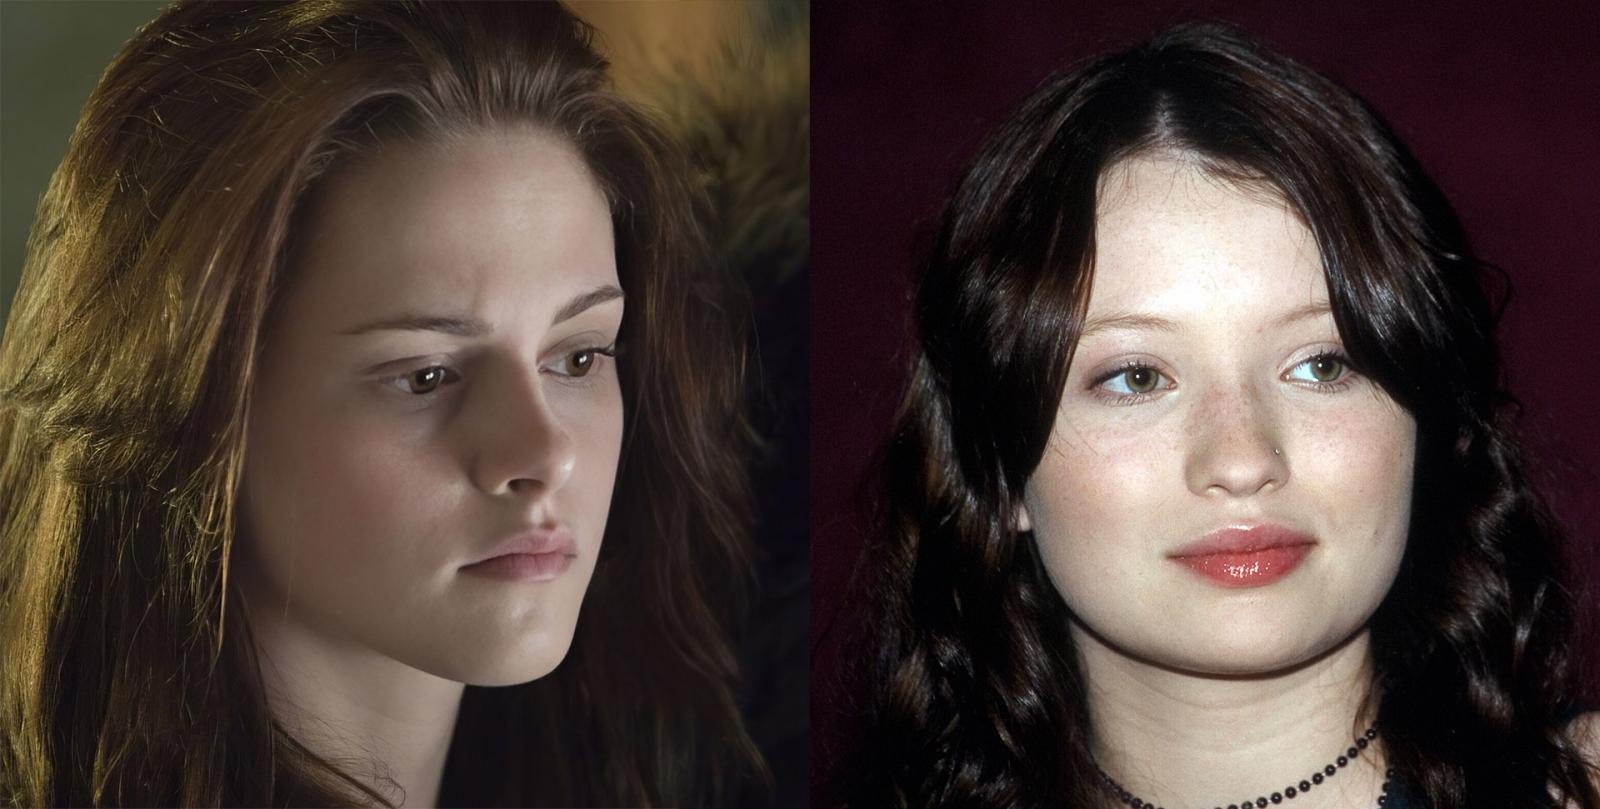 The 6 Twilight Casting Choices We'll Never Get Over - image 1